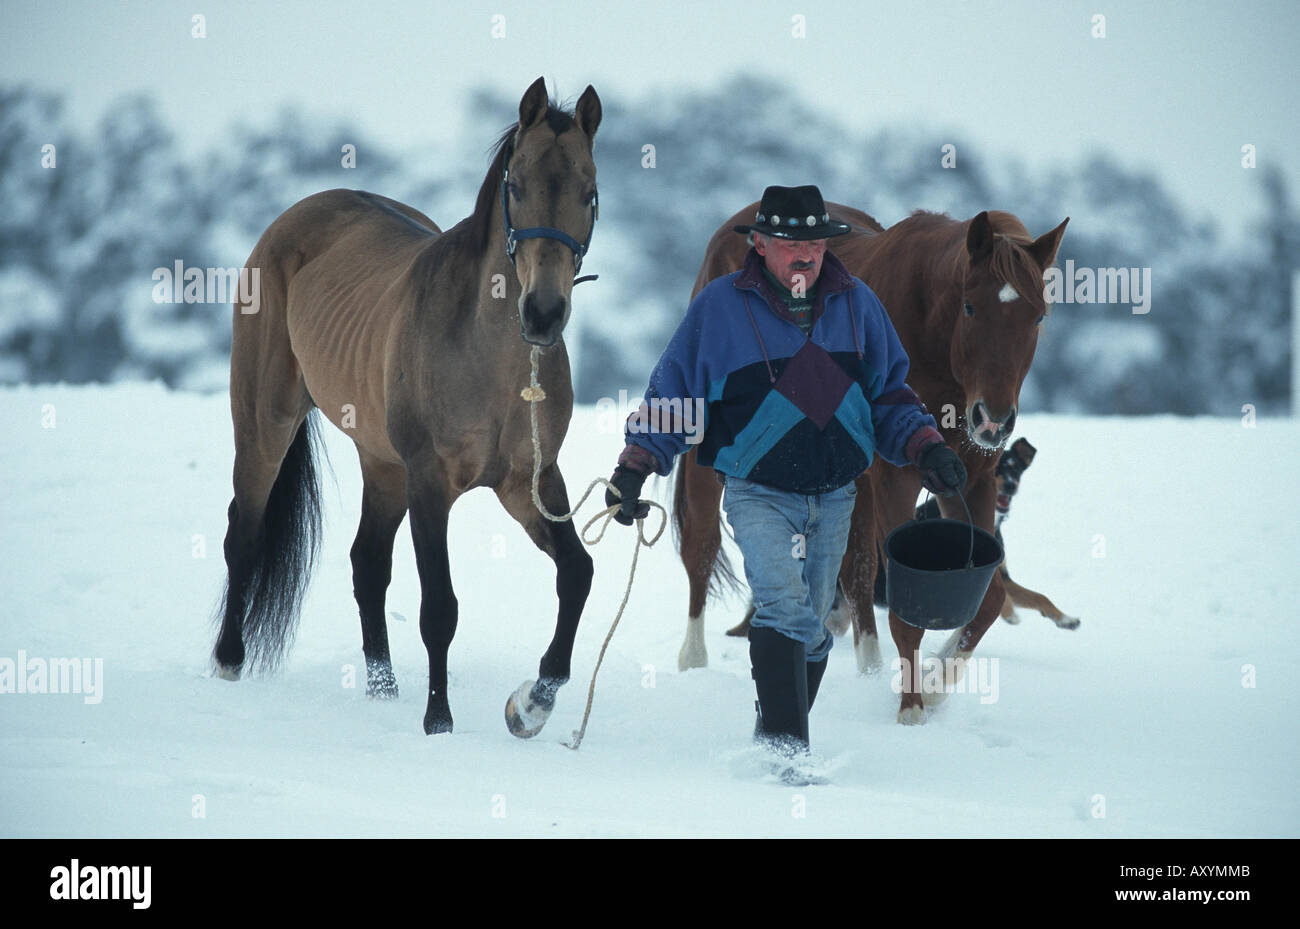 Akhal-Teke horse (Equus przewalskii f. caballus), guided by a man, in snow Stock Photo